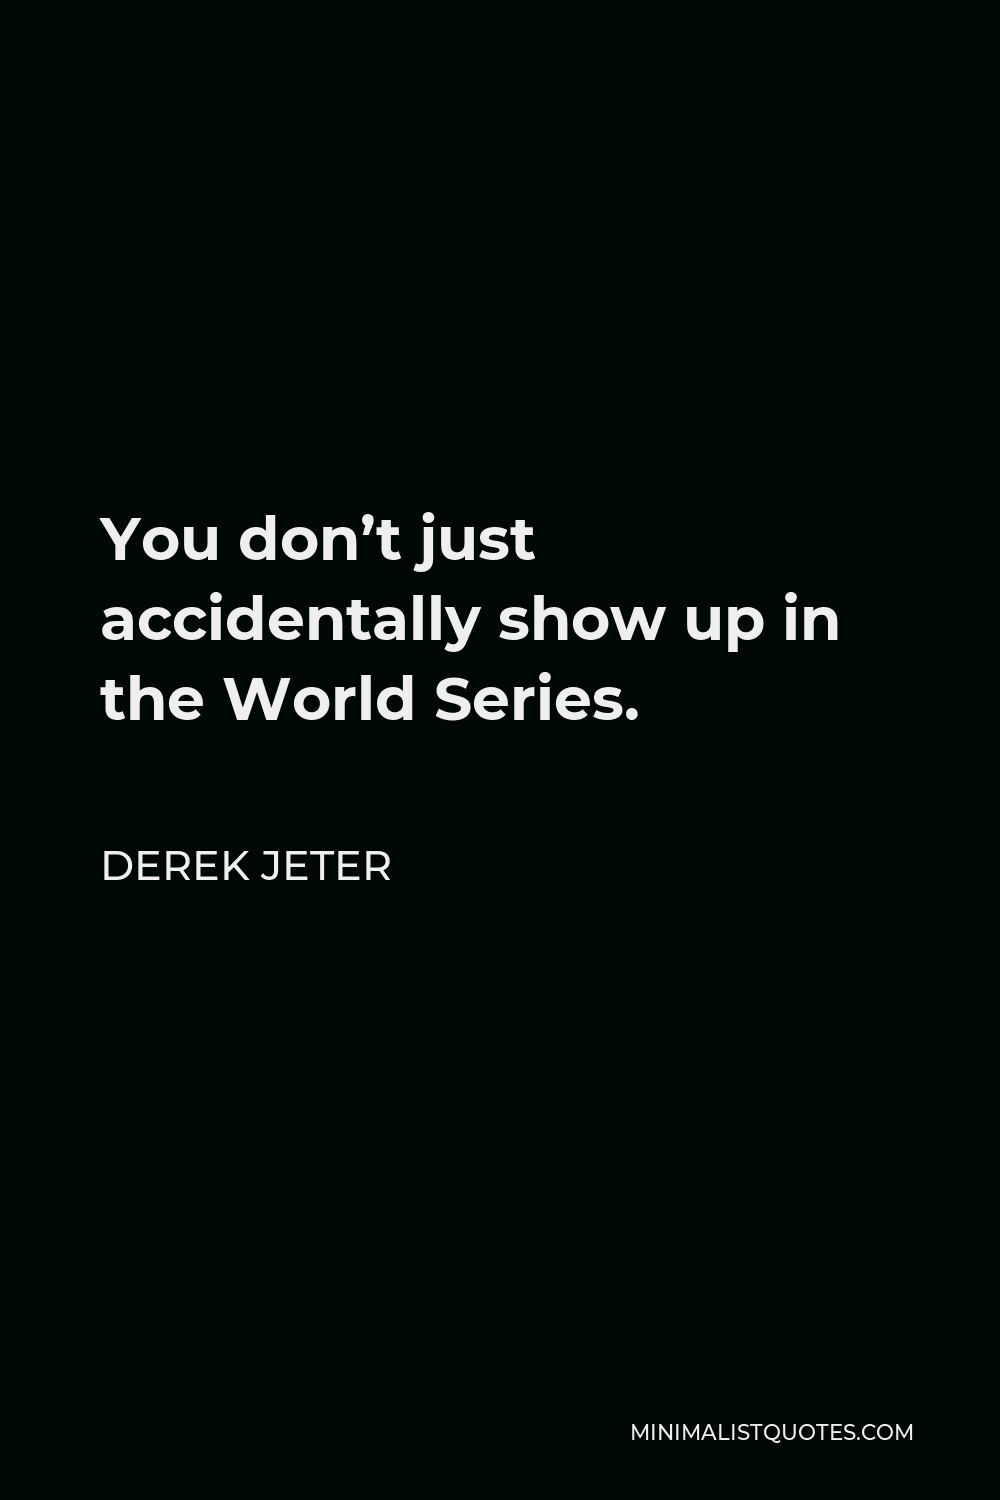 Derek Jeter Quote - You don’t just accidentally show up in the World Series.